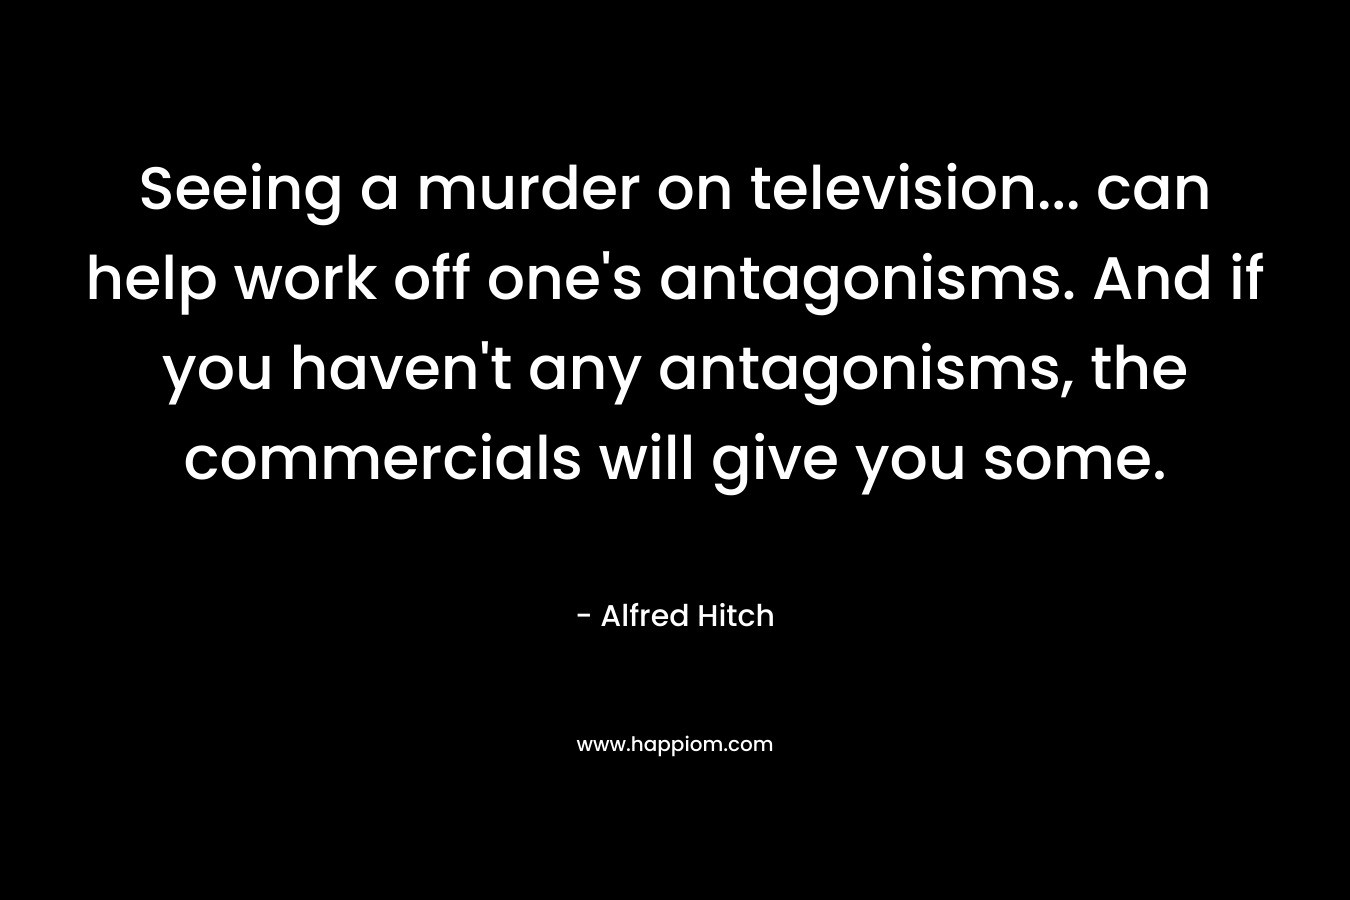 Seeing a murder on television… can help work off one’s antagonisms. And if you haven’t any antagonisms, the commercials will give you some. – Alfred Hitch